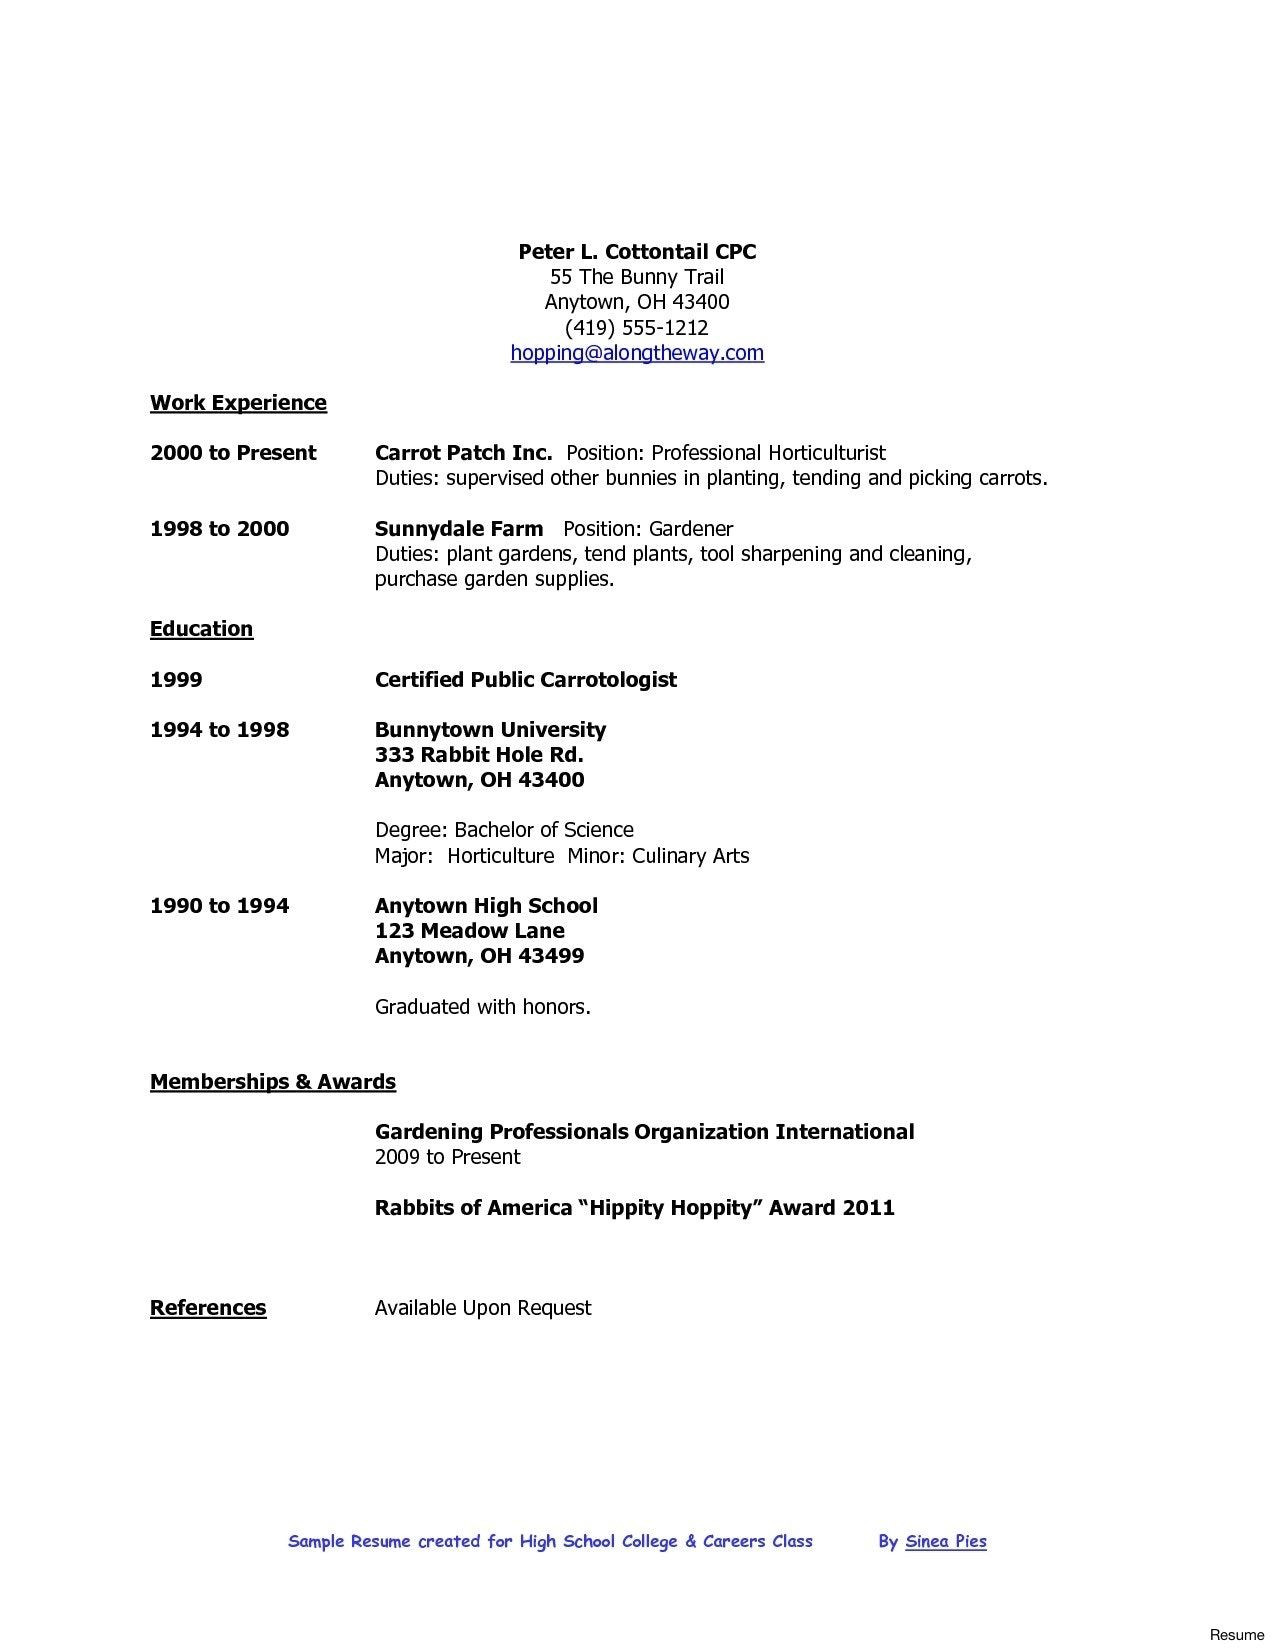 Sample Resume for Highschool Graduate with No Work Experience Resume format High School Graduate , #format #graduate #resume …